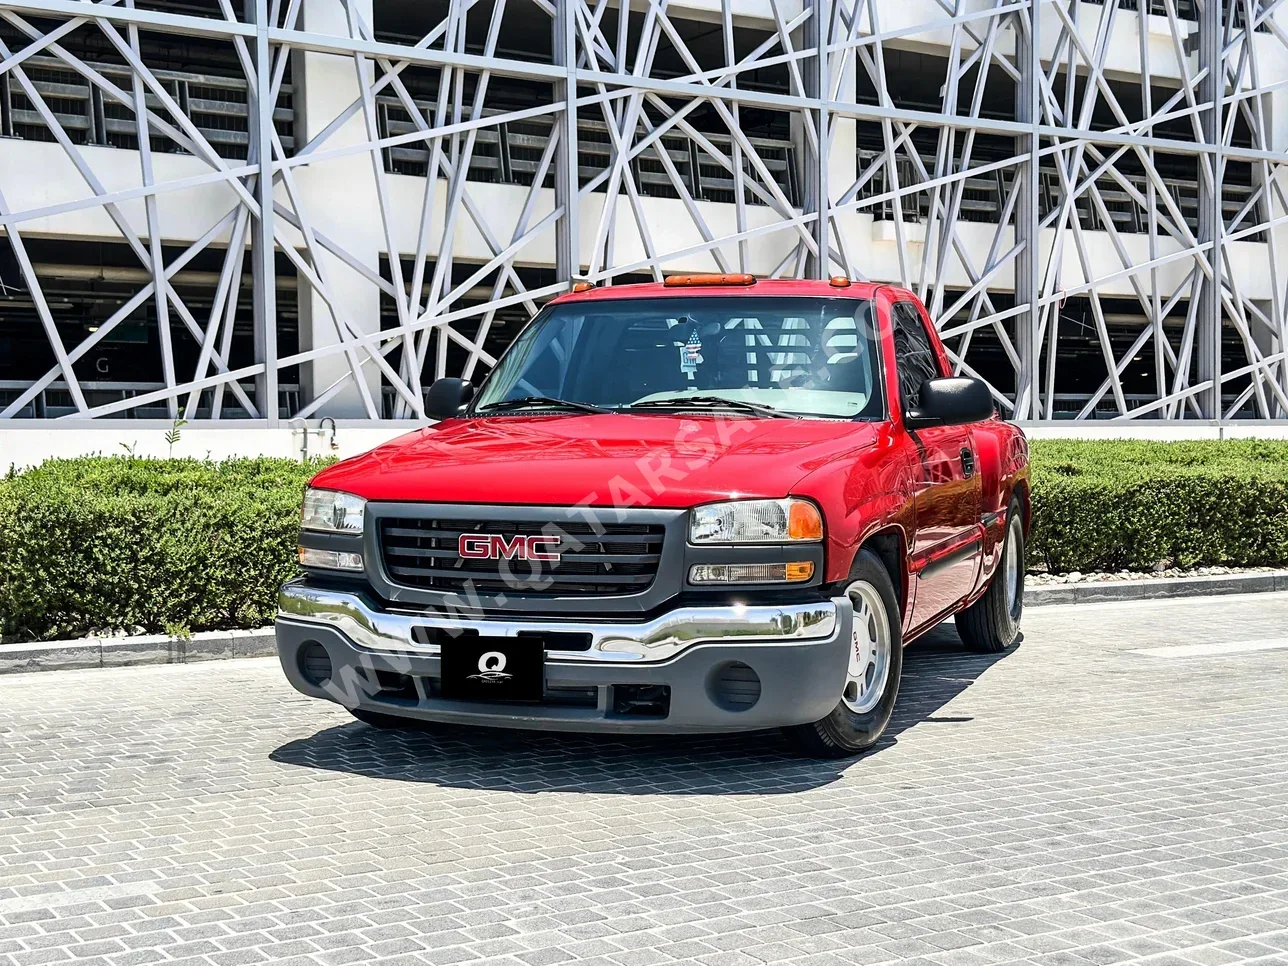 GMC  Sierra  1500  2004  Manual  195,000 Km  8 Cylinder  Four Wheel Drive (4WD)  Pick Up  Red